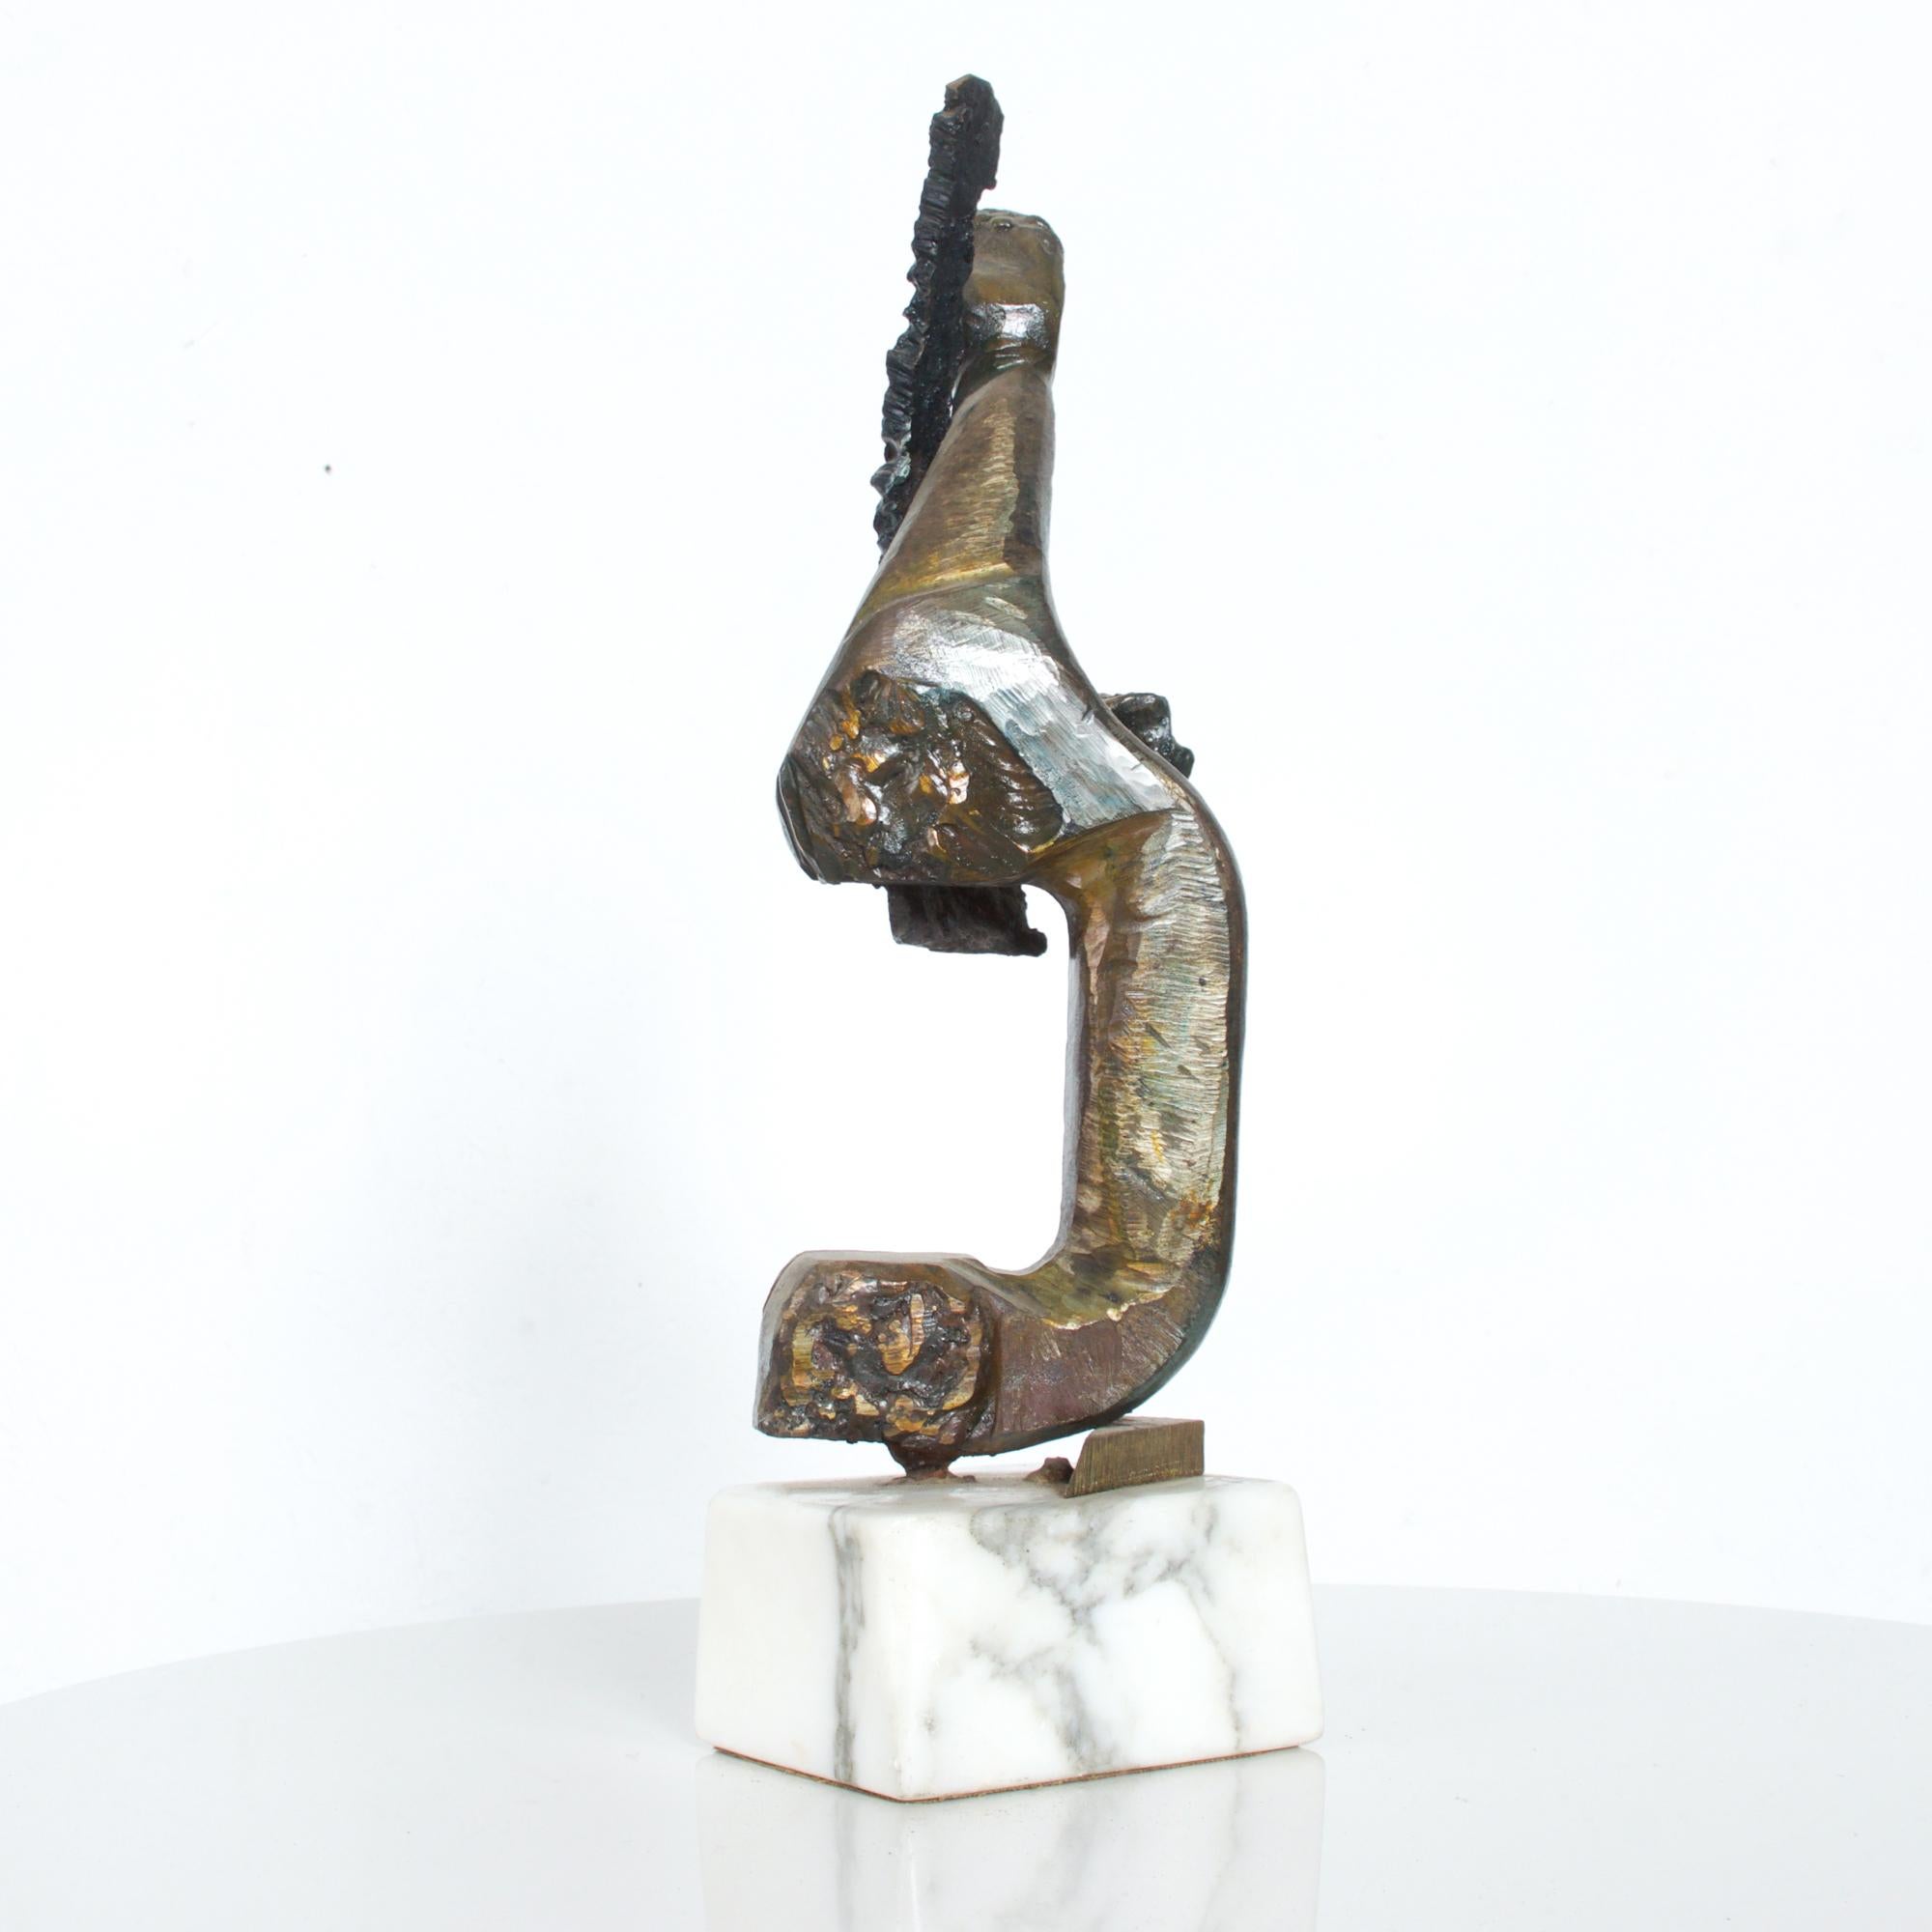 Stunning abstract Brutalist sculpture in patinated iron mounted on contrasting simple white marble base.
In the manner of artist Mathias Goeritz of Mexico.
Dimensions: 16